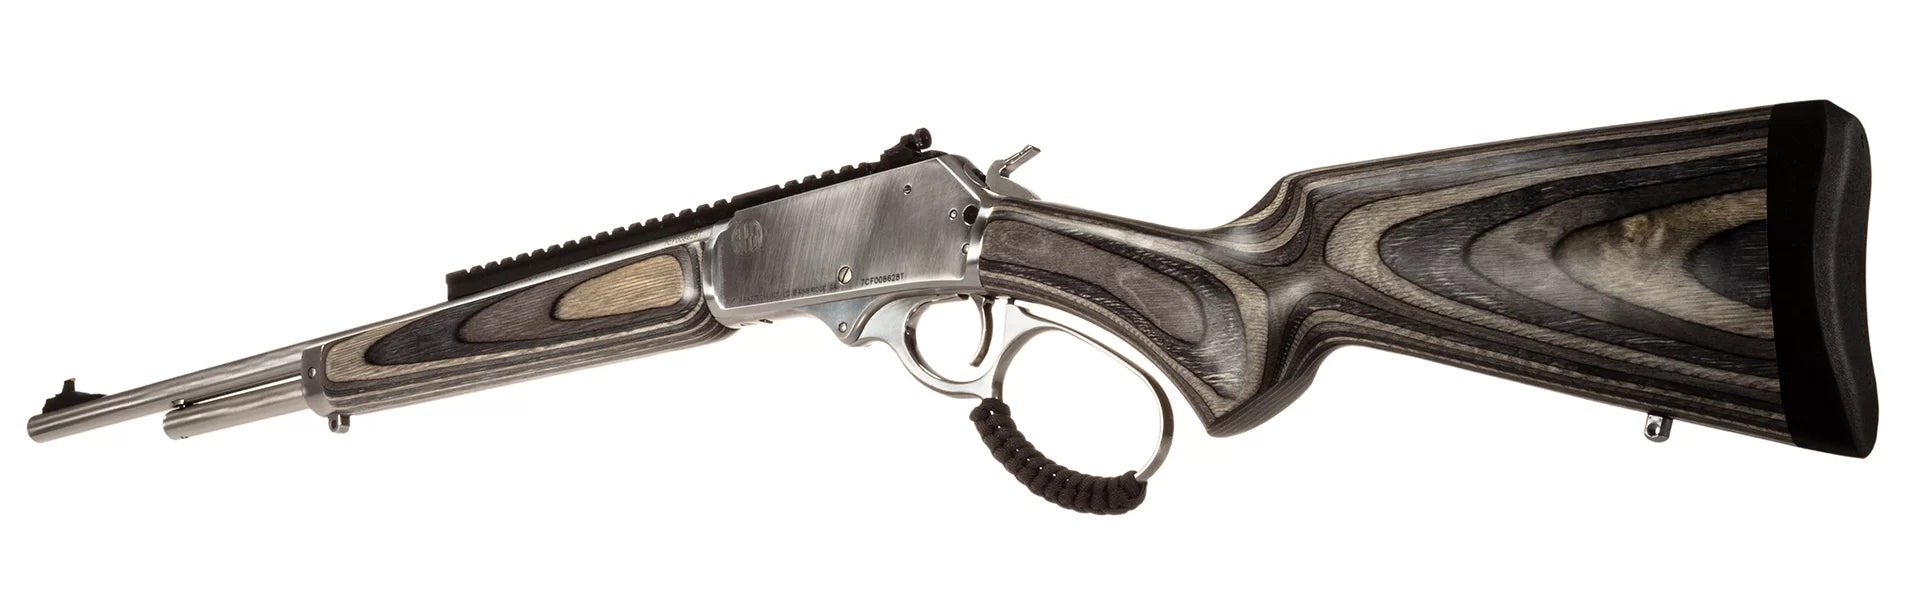 ROSSI - R95 LAMINATE STAINLESS 30-30 LEVER ACTION - 20" - IN STORE NOW